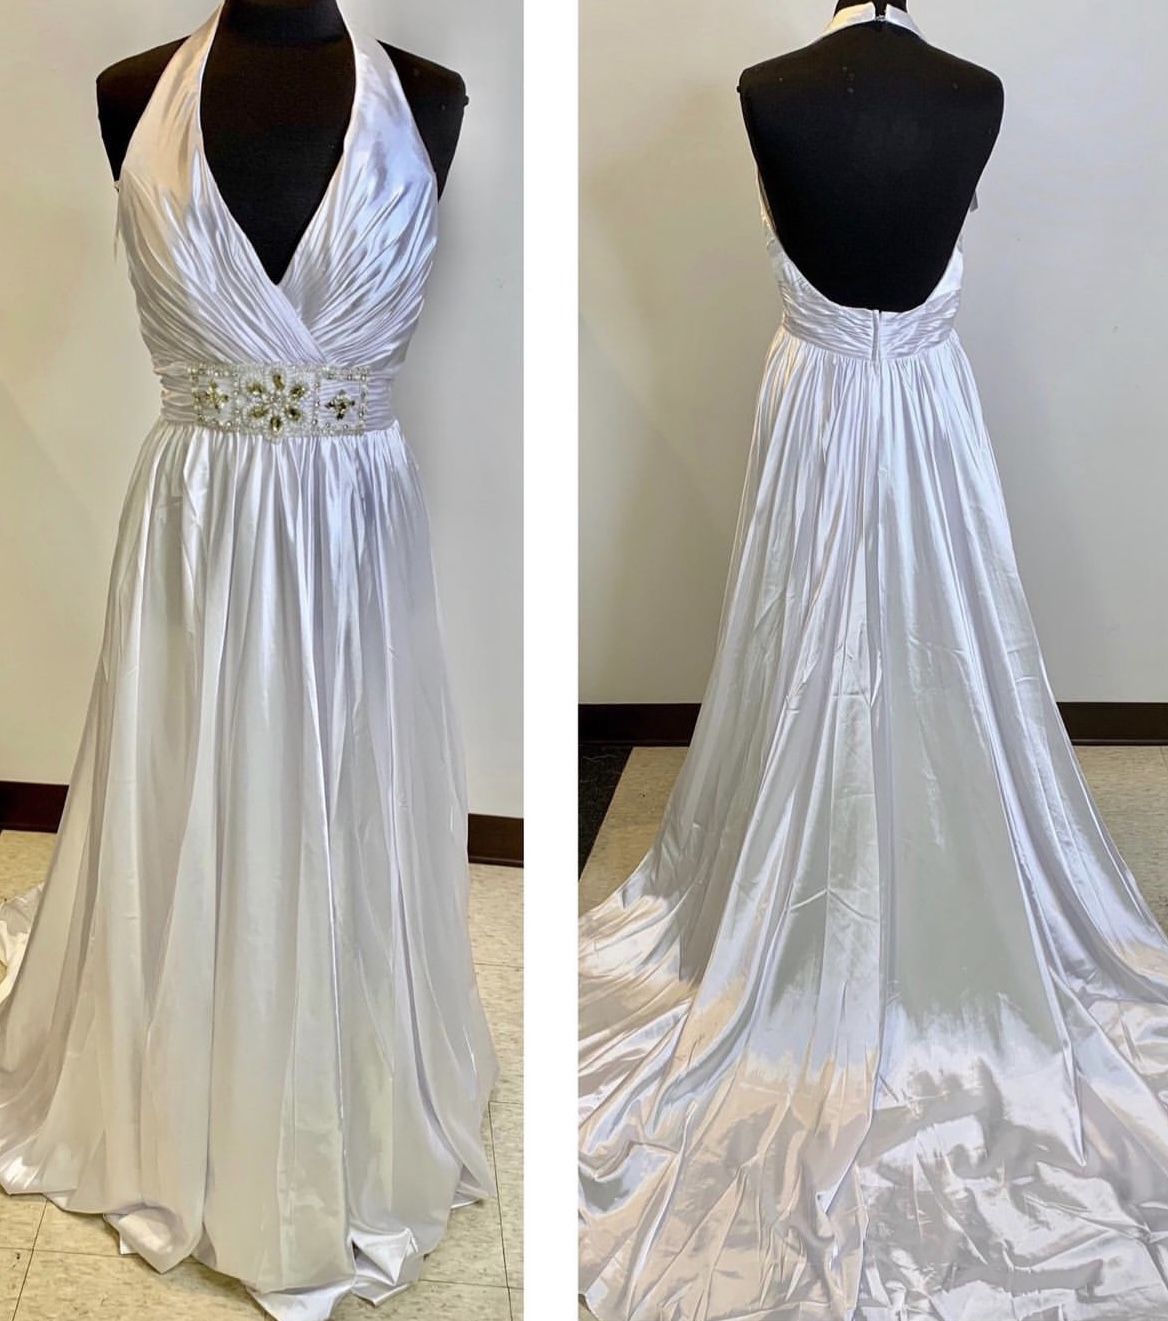 New With Tags Size 12 Satin Wedding Gown $251